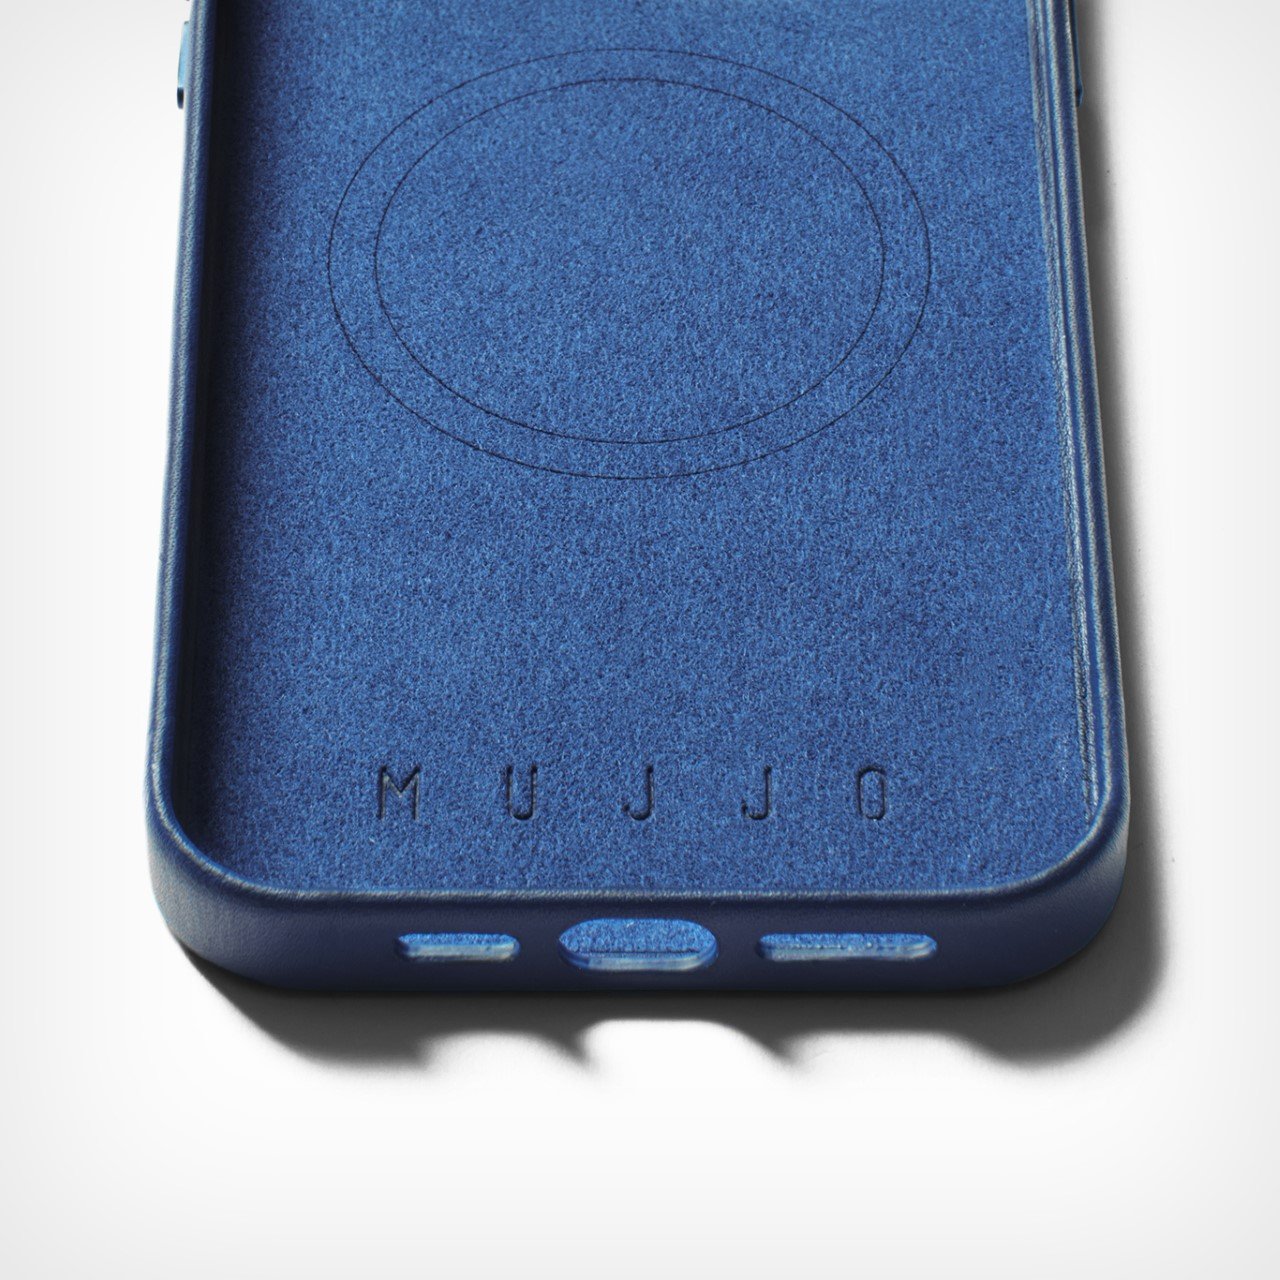 Mujjo's Full Leather Wallet Case for the iPhone 15 Pro